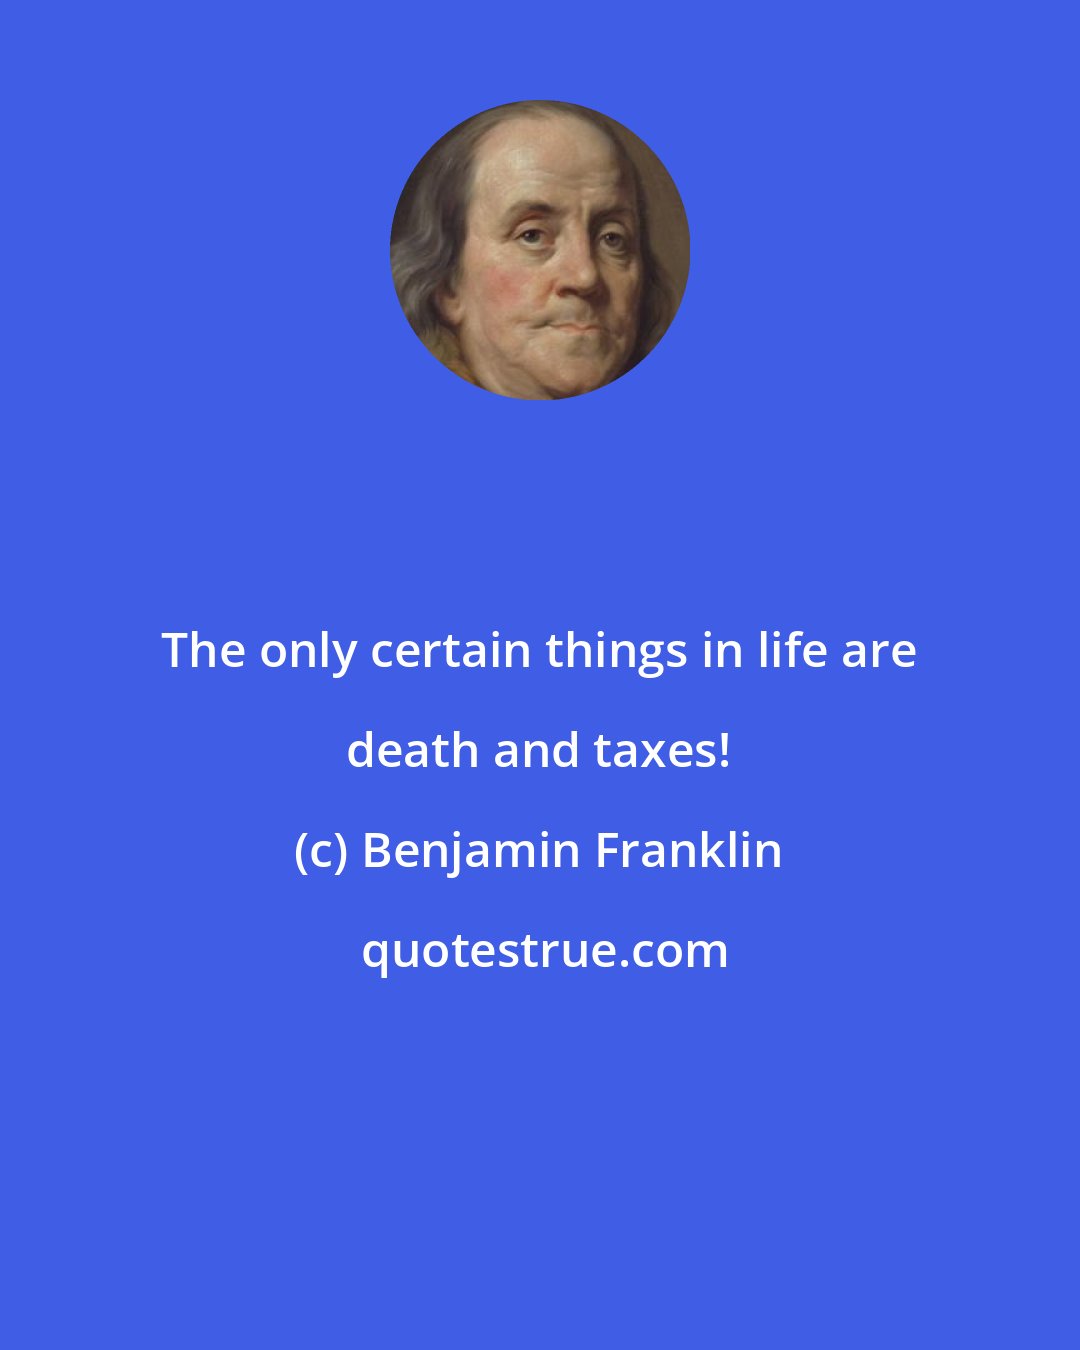 Benjamin Franklin: The only certain things in life are death and taxes!